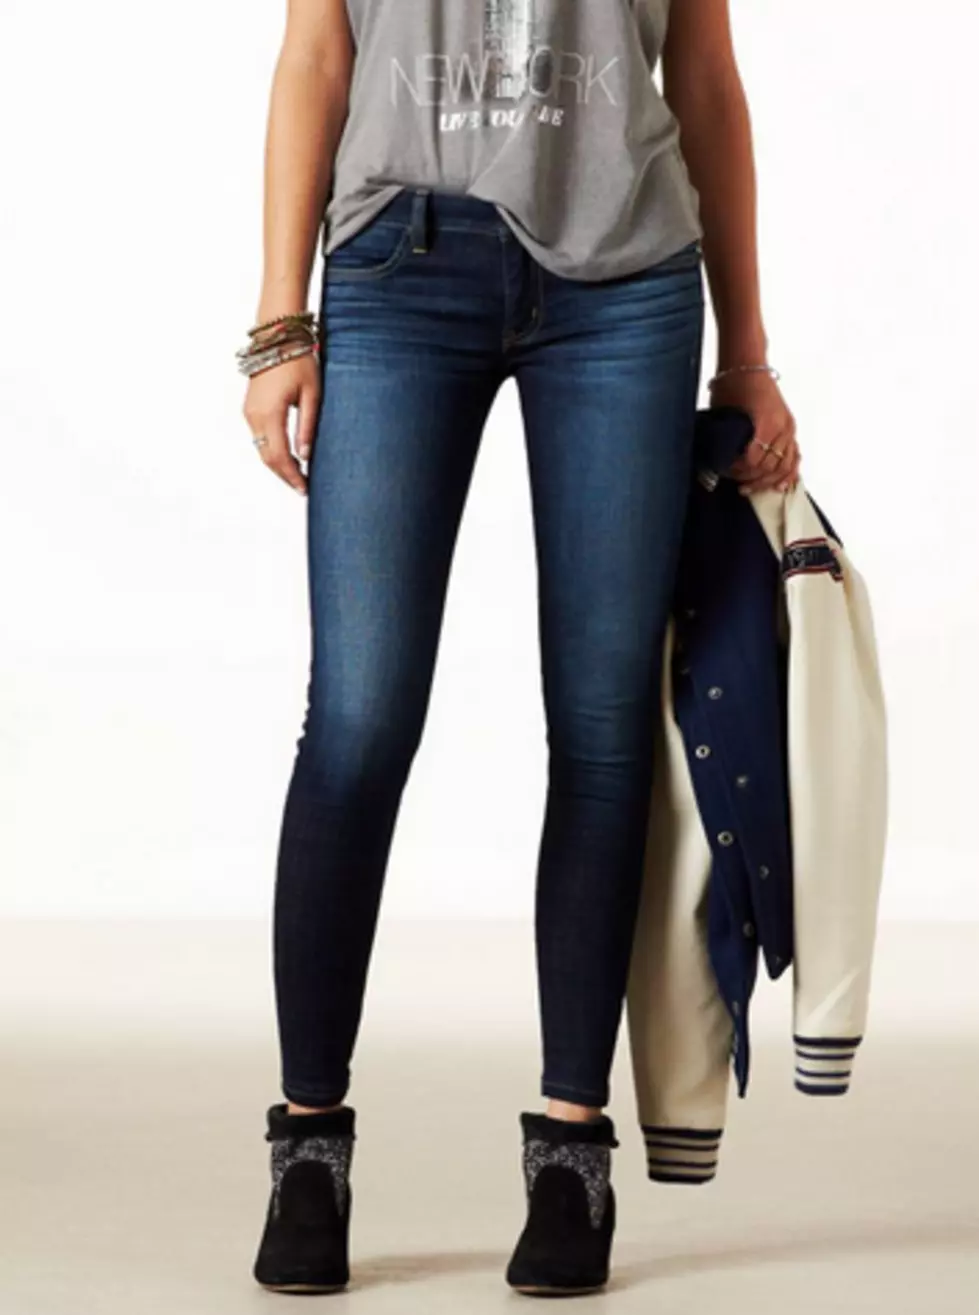 Where Can I Find a Pair of Skinny Jeans that Fit a Curvy Girl in Evansville and Owensboro?